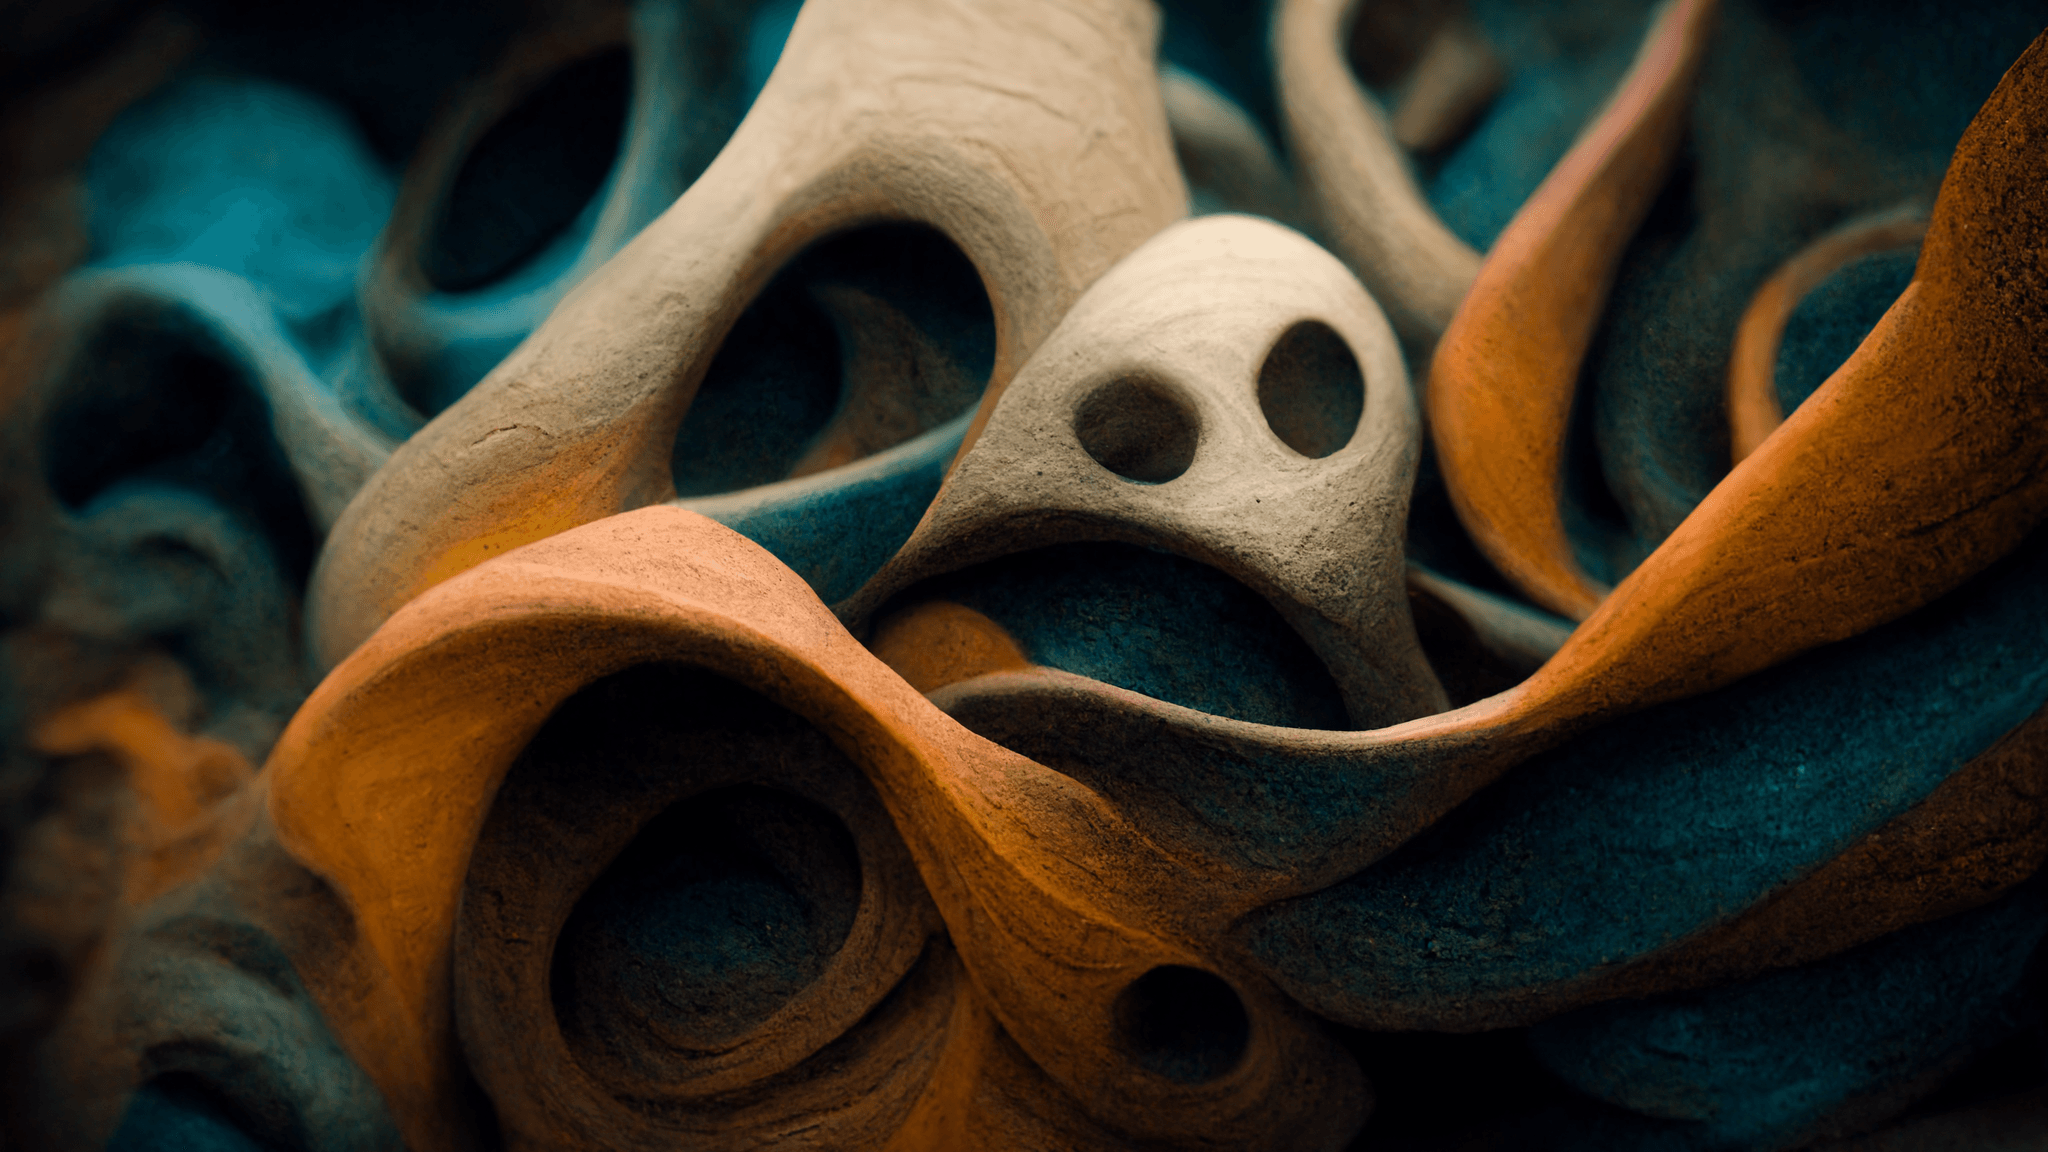 Abstract Clay Sculpture in Motion #2